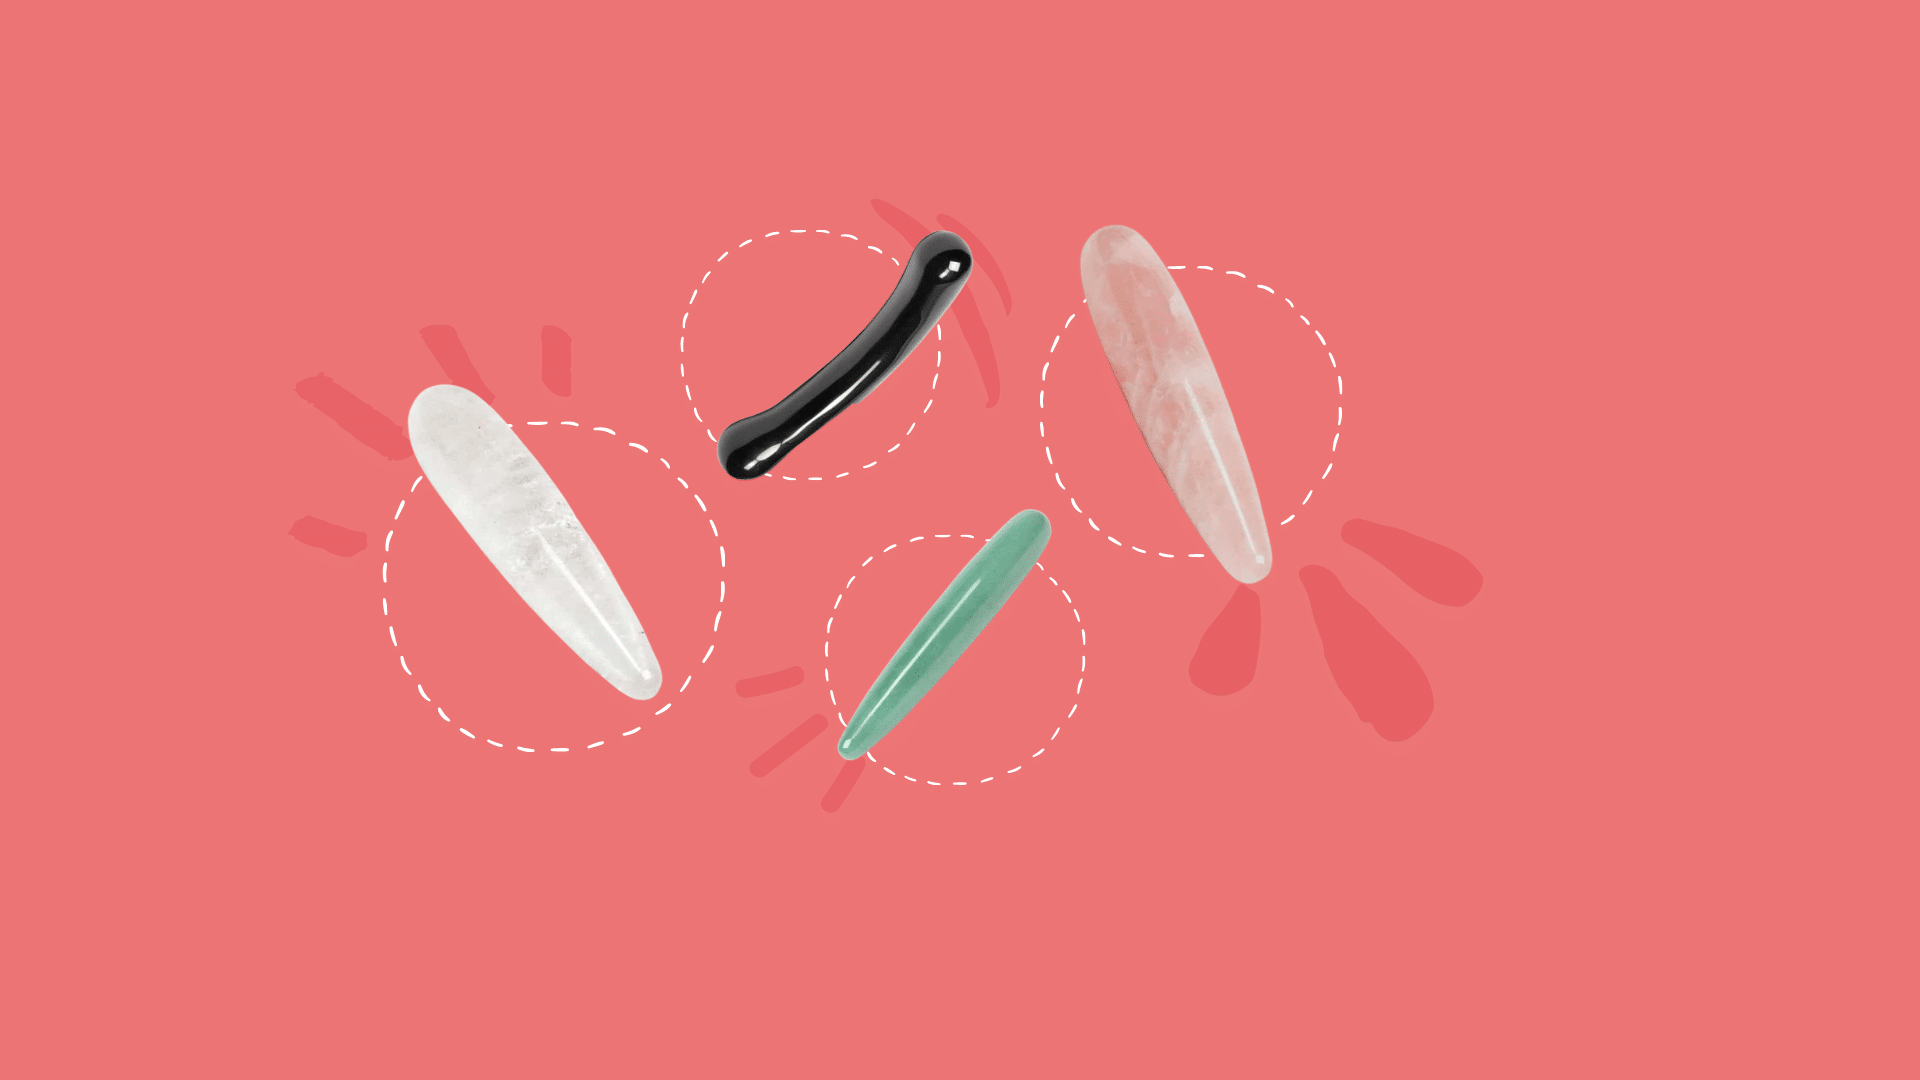 The 5 Best Crystal Dildos & Other Crystal Sex Toys to Fill Yourself With Positive Energy